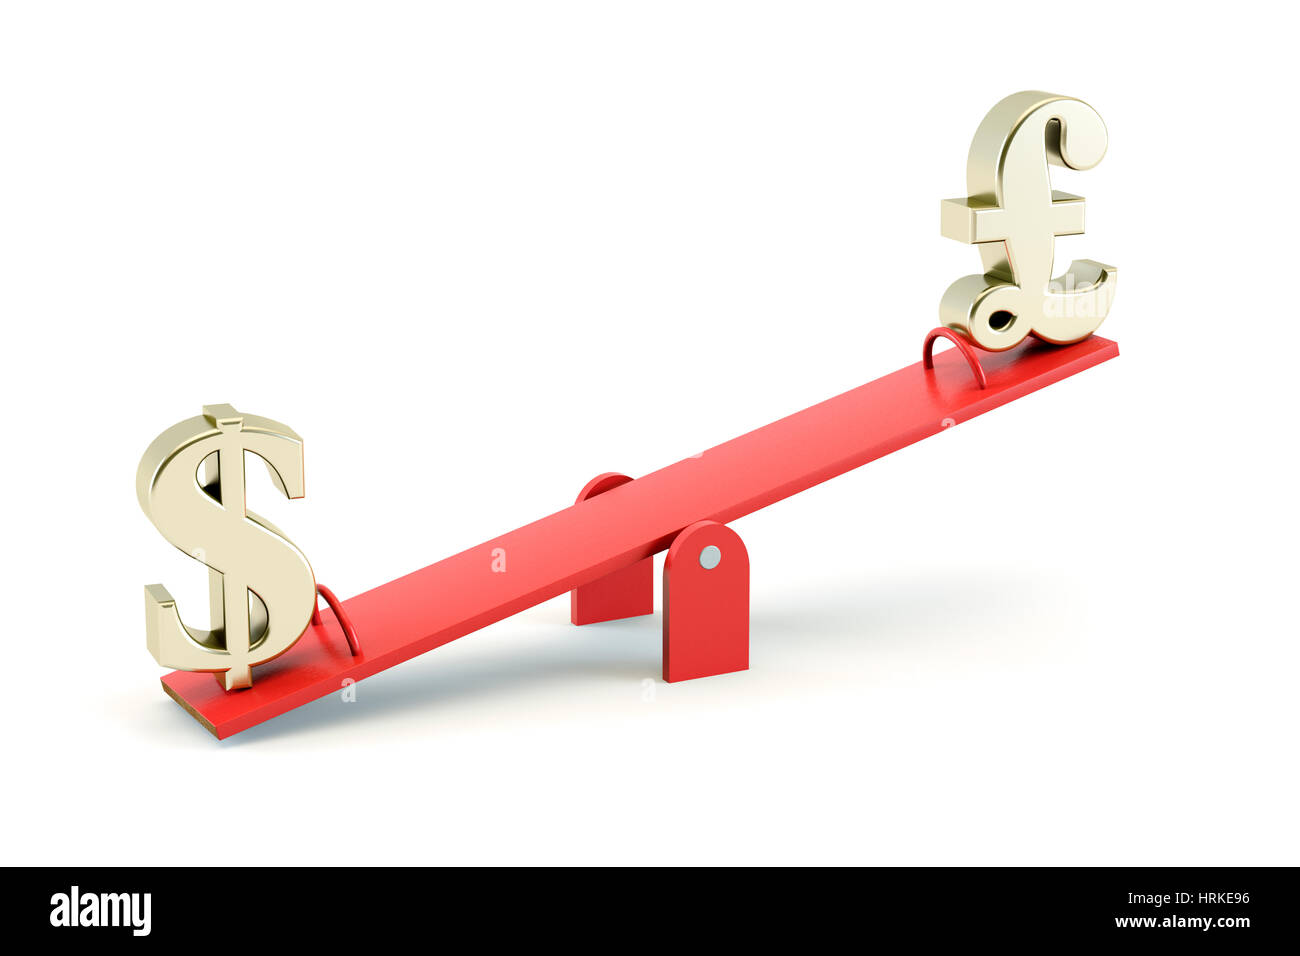 Gold US Dollar symbol and gold British GBP Pound Sterling on a Seesaw isolated on a white background - exchange rate concept Stock Photo